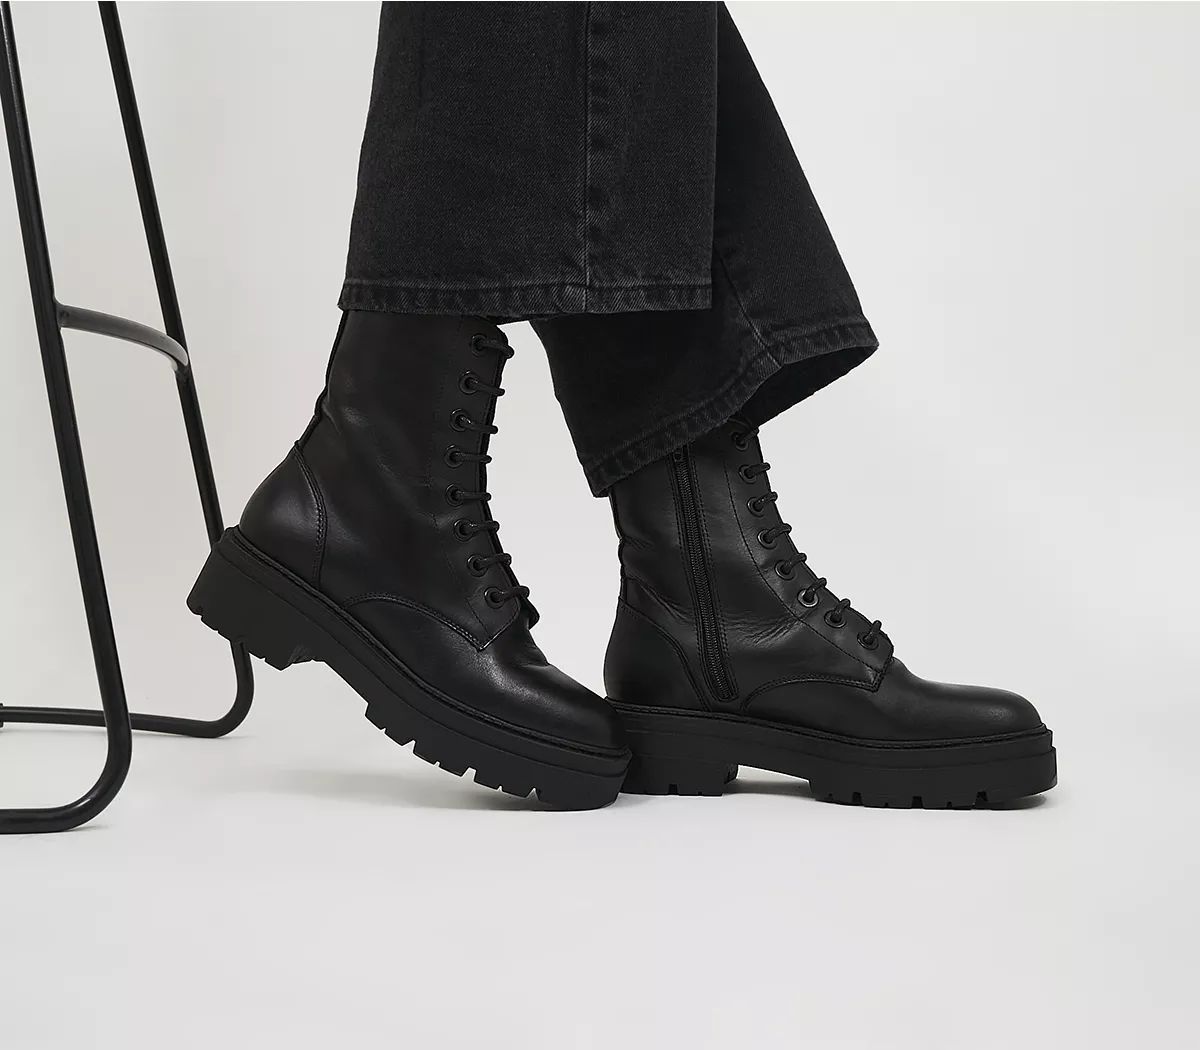 Office
								Arrow Cleat Sole Lace Up Hiker Boots
								Black Leather | OFFICE London (UK)